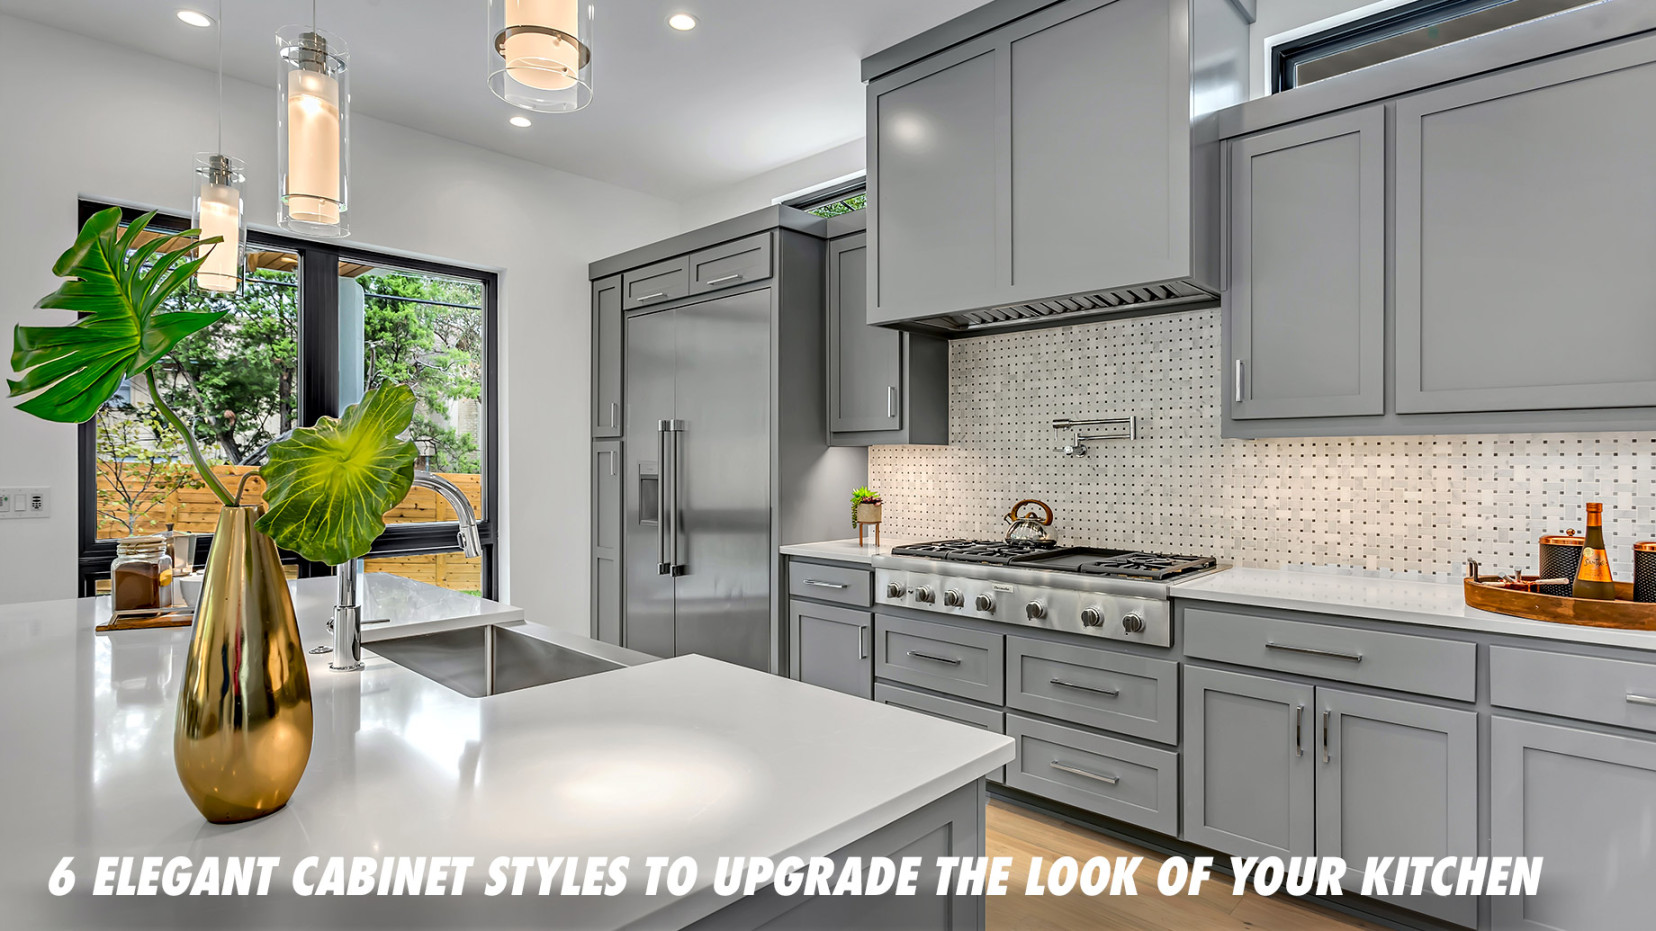 Elegant Cabinet Styles to Upgrade the Look of Your Kitchen – The